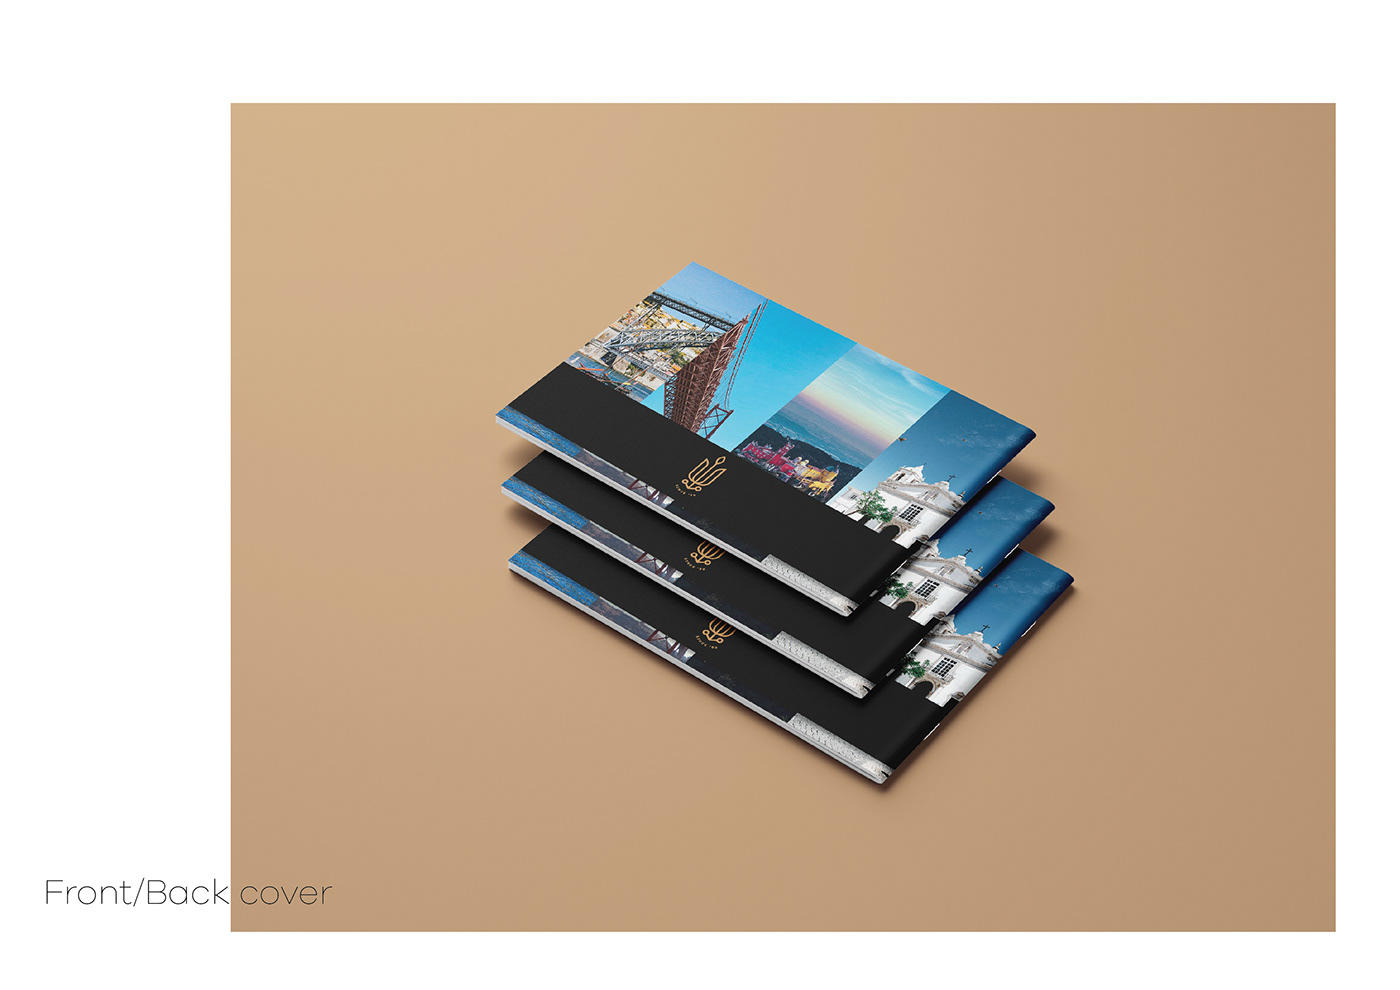 Booklet InDesign brochure Landscape editorial brand text industry